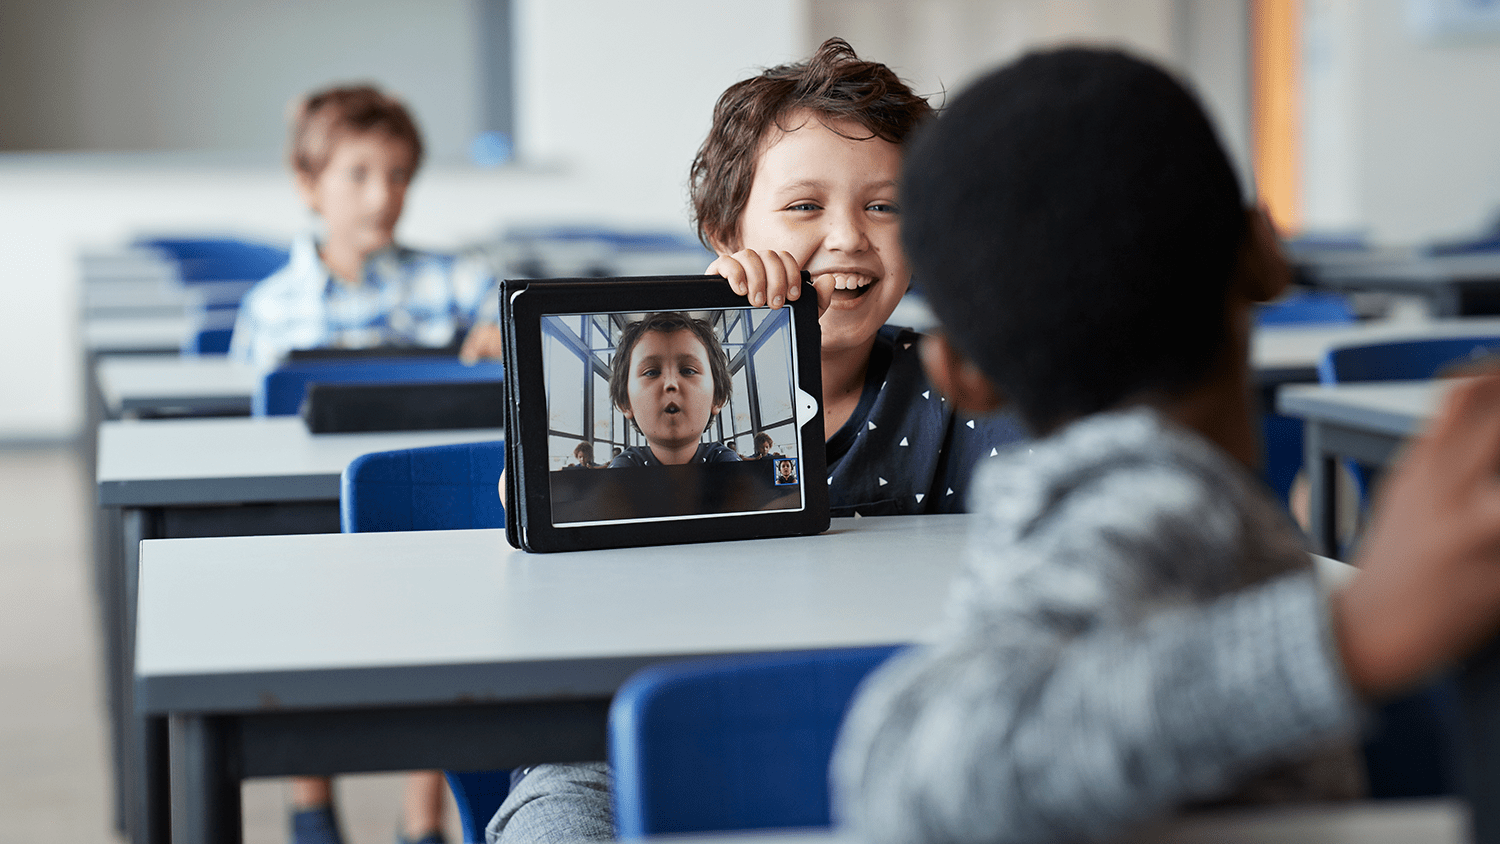 stock image of kids in a classroom with a tablet showing goofy selfies